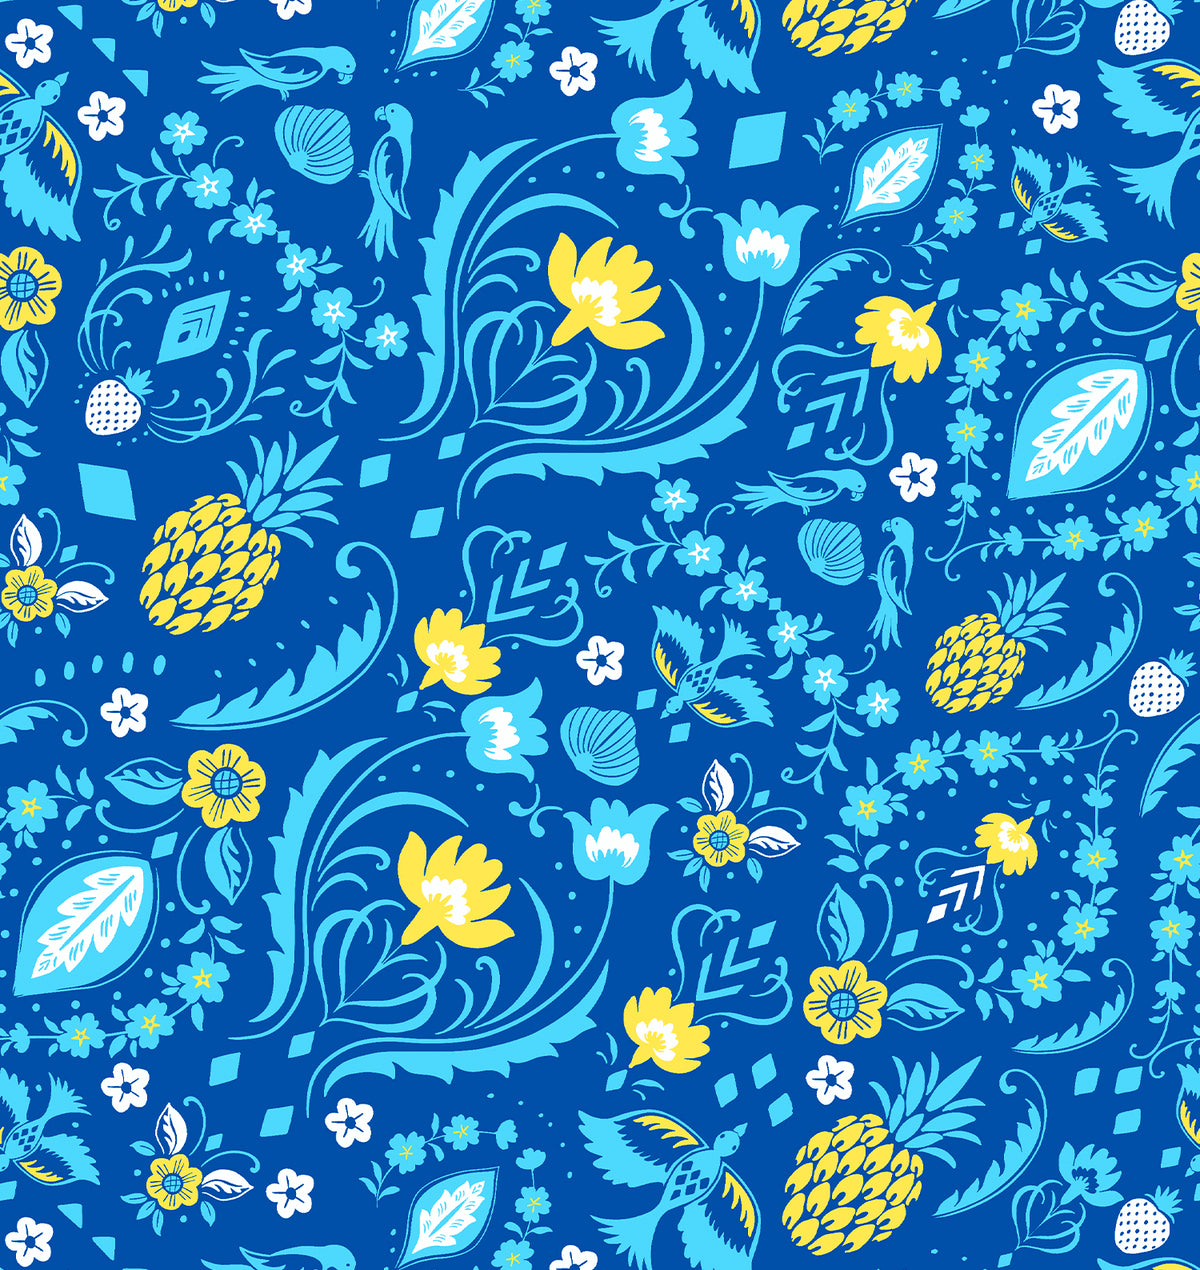 Sunsets Pineapple Grove tropical print with parrots on an electric blue background